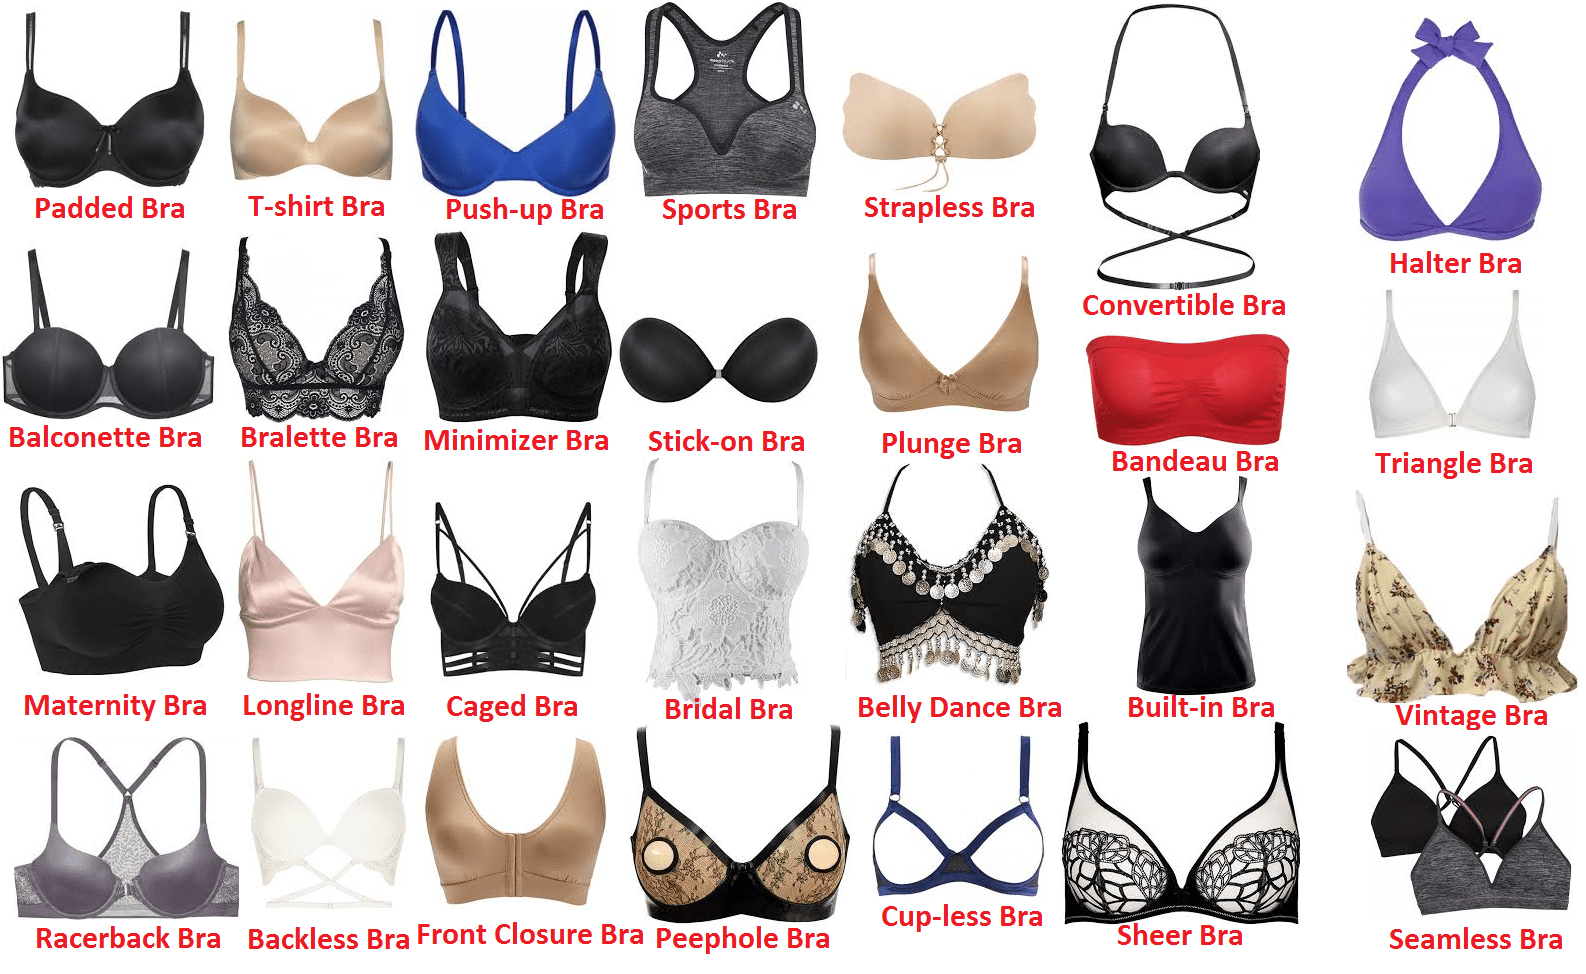 Online Sellers: Types of Bras, Padding, Styles and More! TERMINOLOGY ...